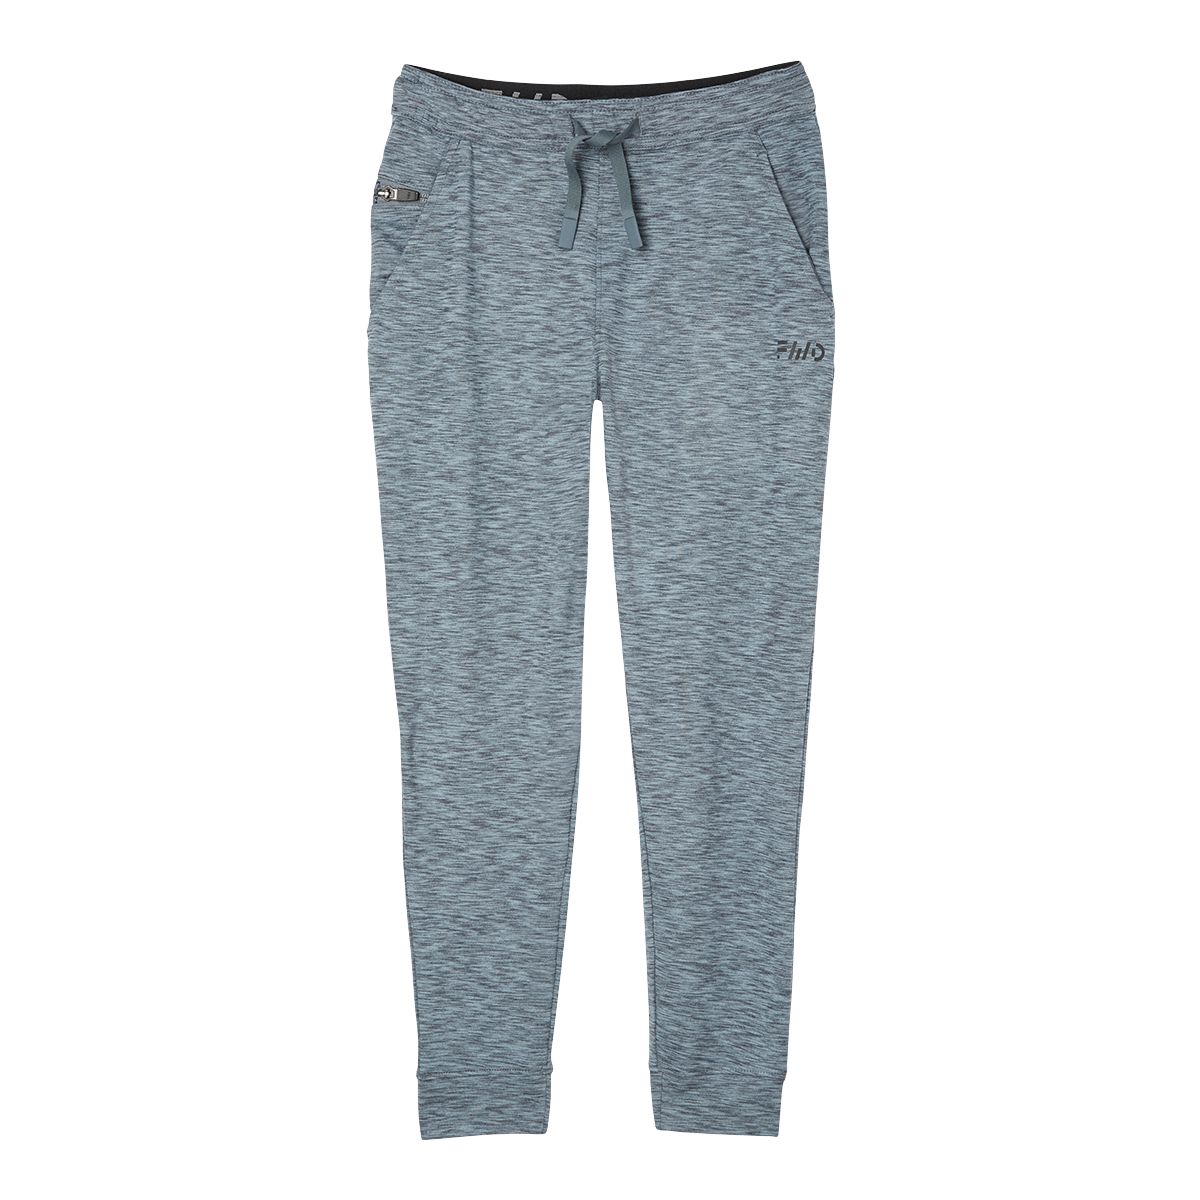 OFHS Cross Country Ladies Jogger Pants (C019) - RycoSports